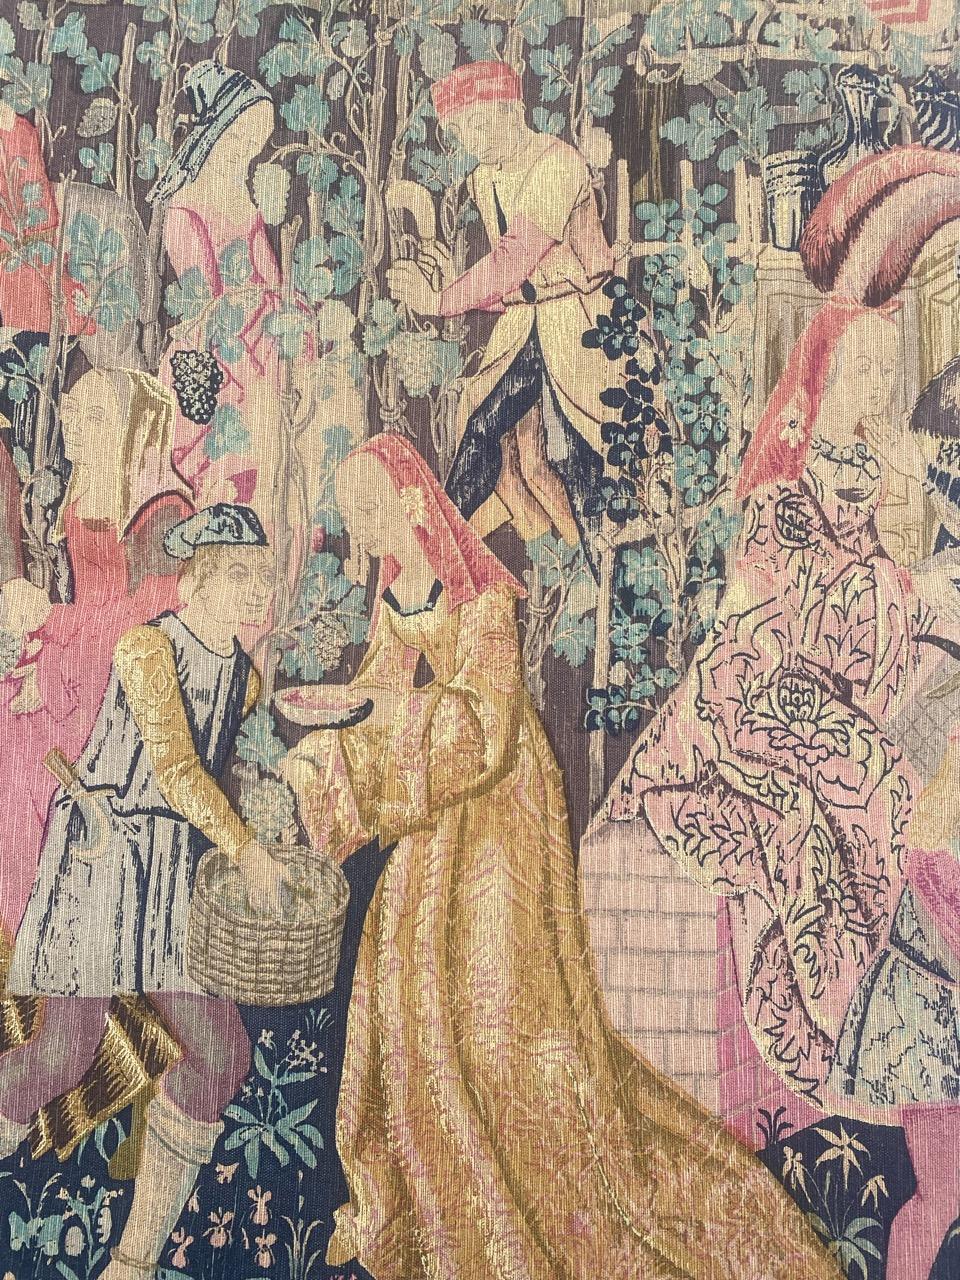 Hand-Painted Pretty Vintage French Hand Printed Tapestry Medieval Museum Design